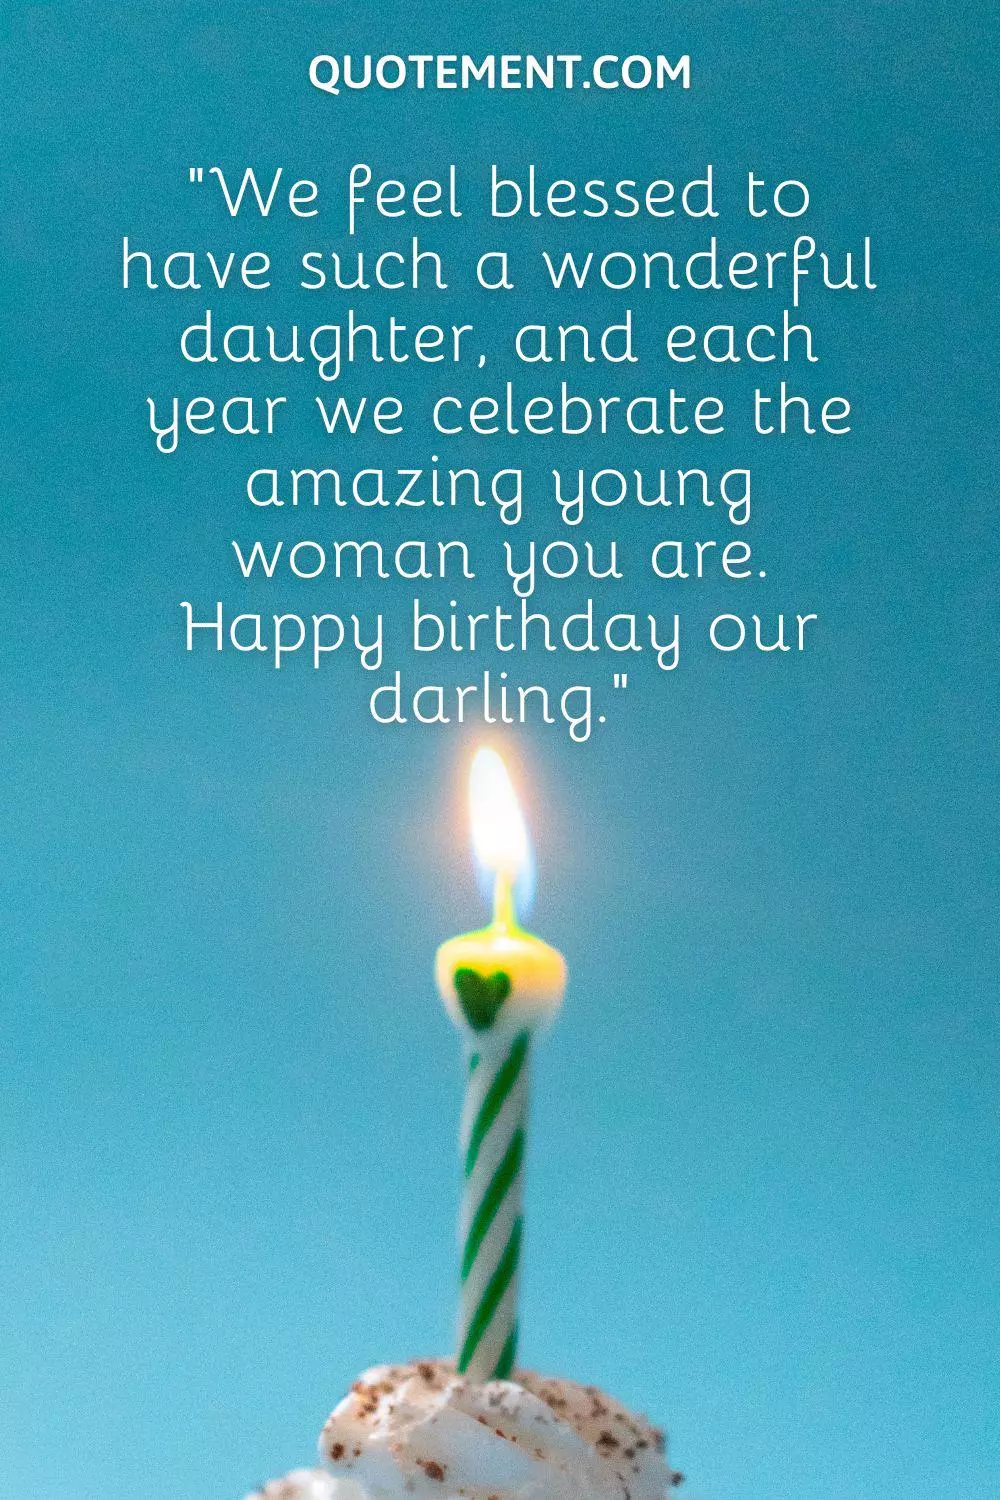 “We feel blessed to have such a wonderful daughter, and each year we celebrate the amazing young woman you are. Happy birthday, our darling.”